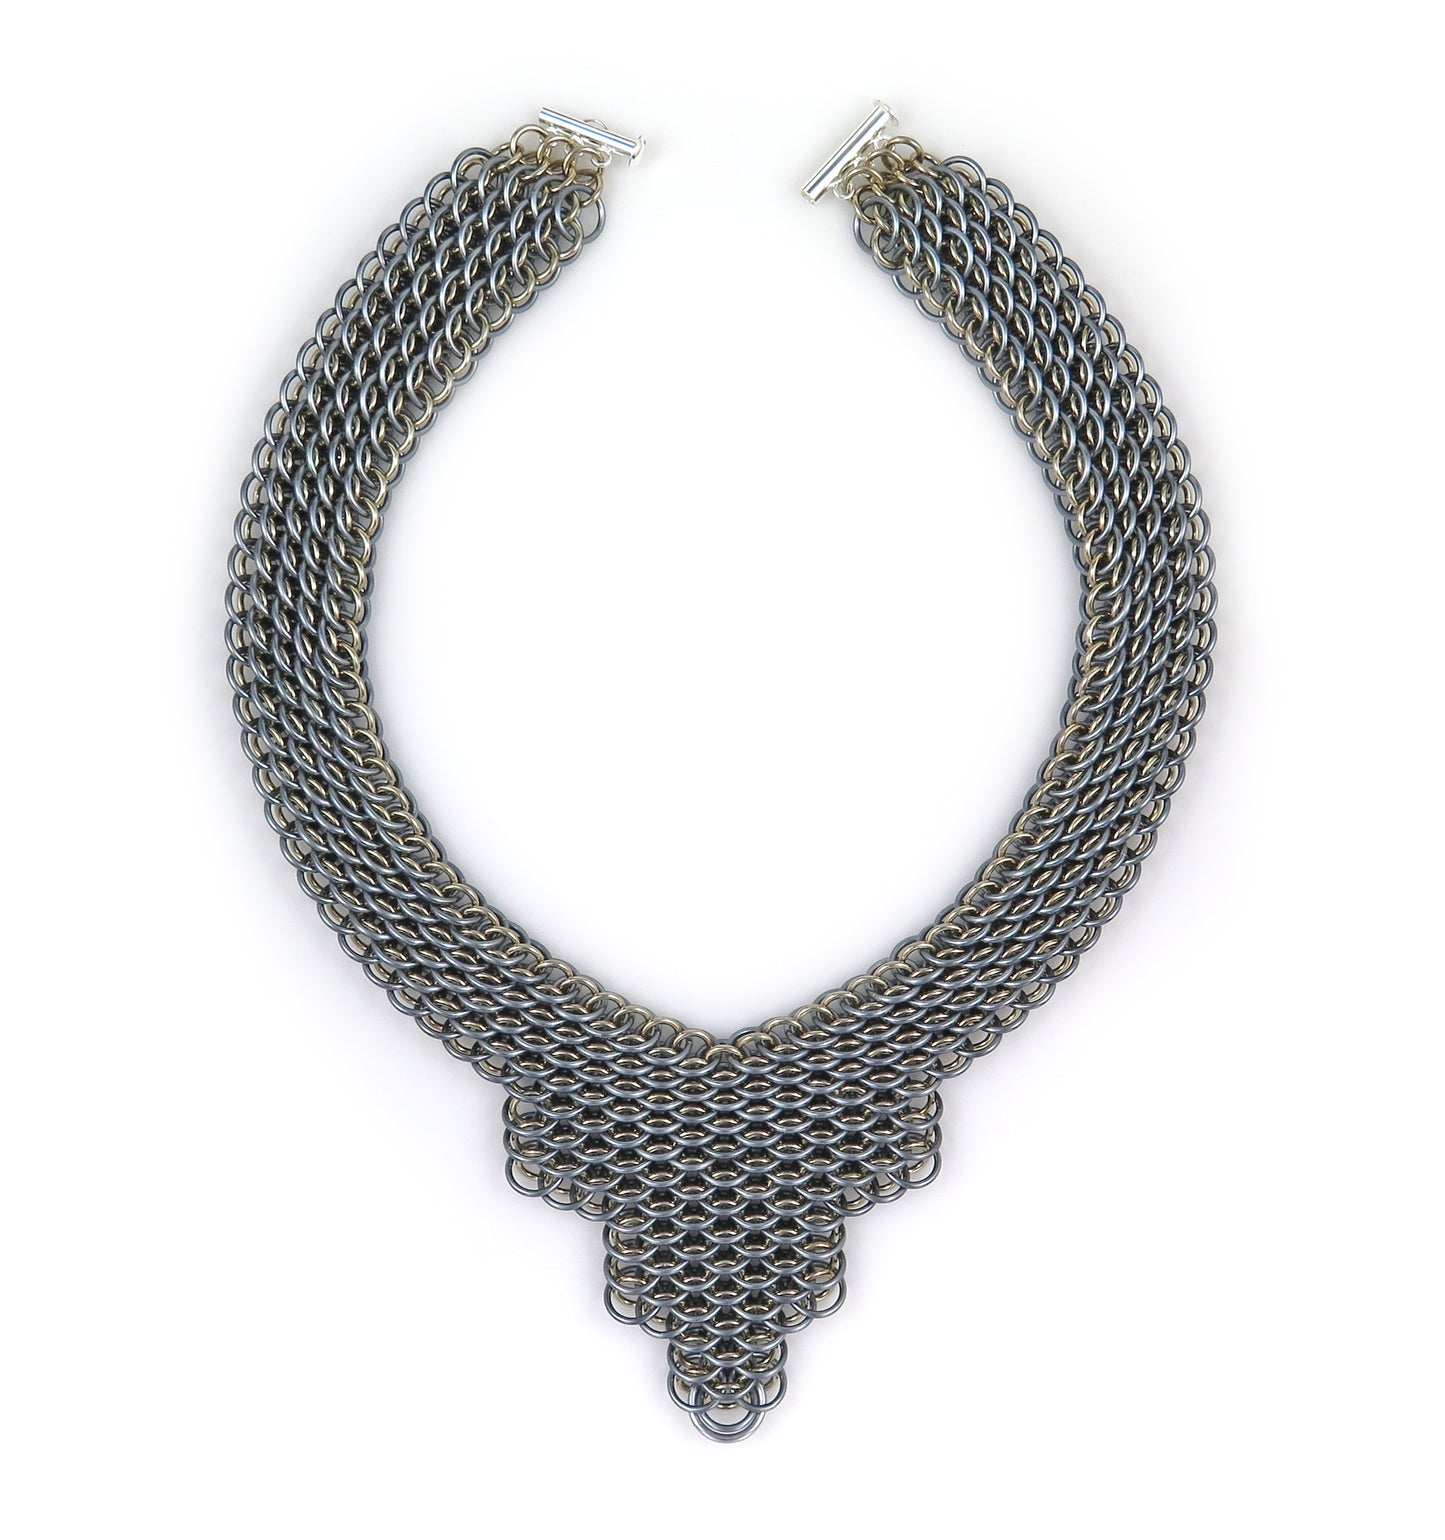 Dragonscale Steps Necklace